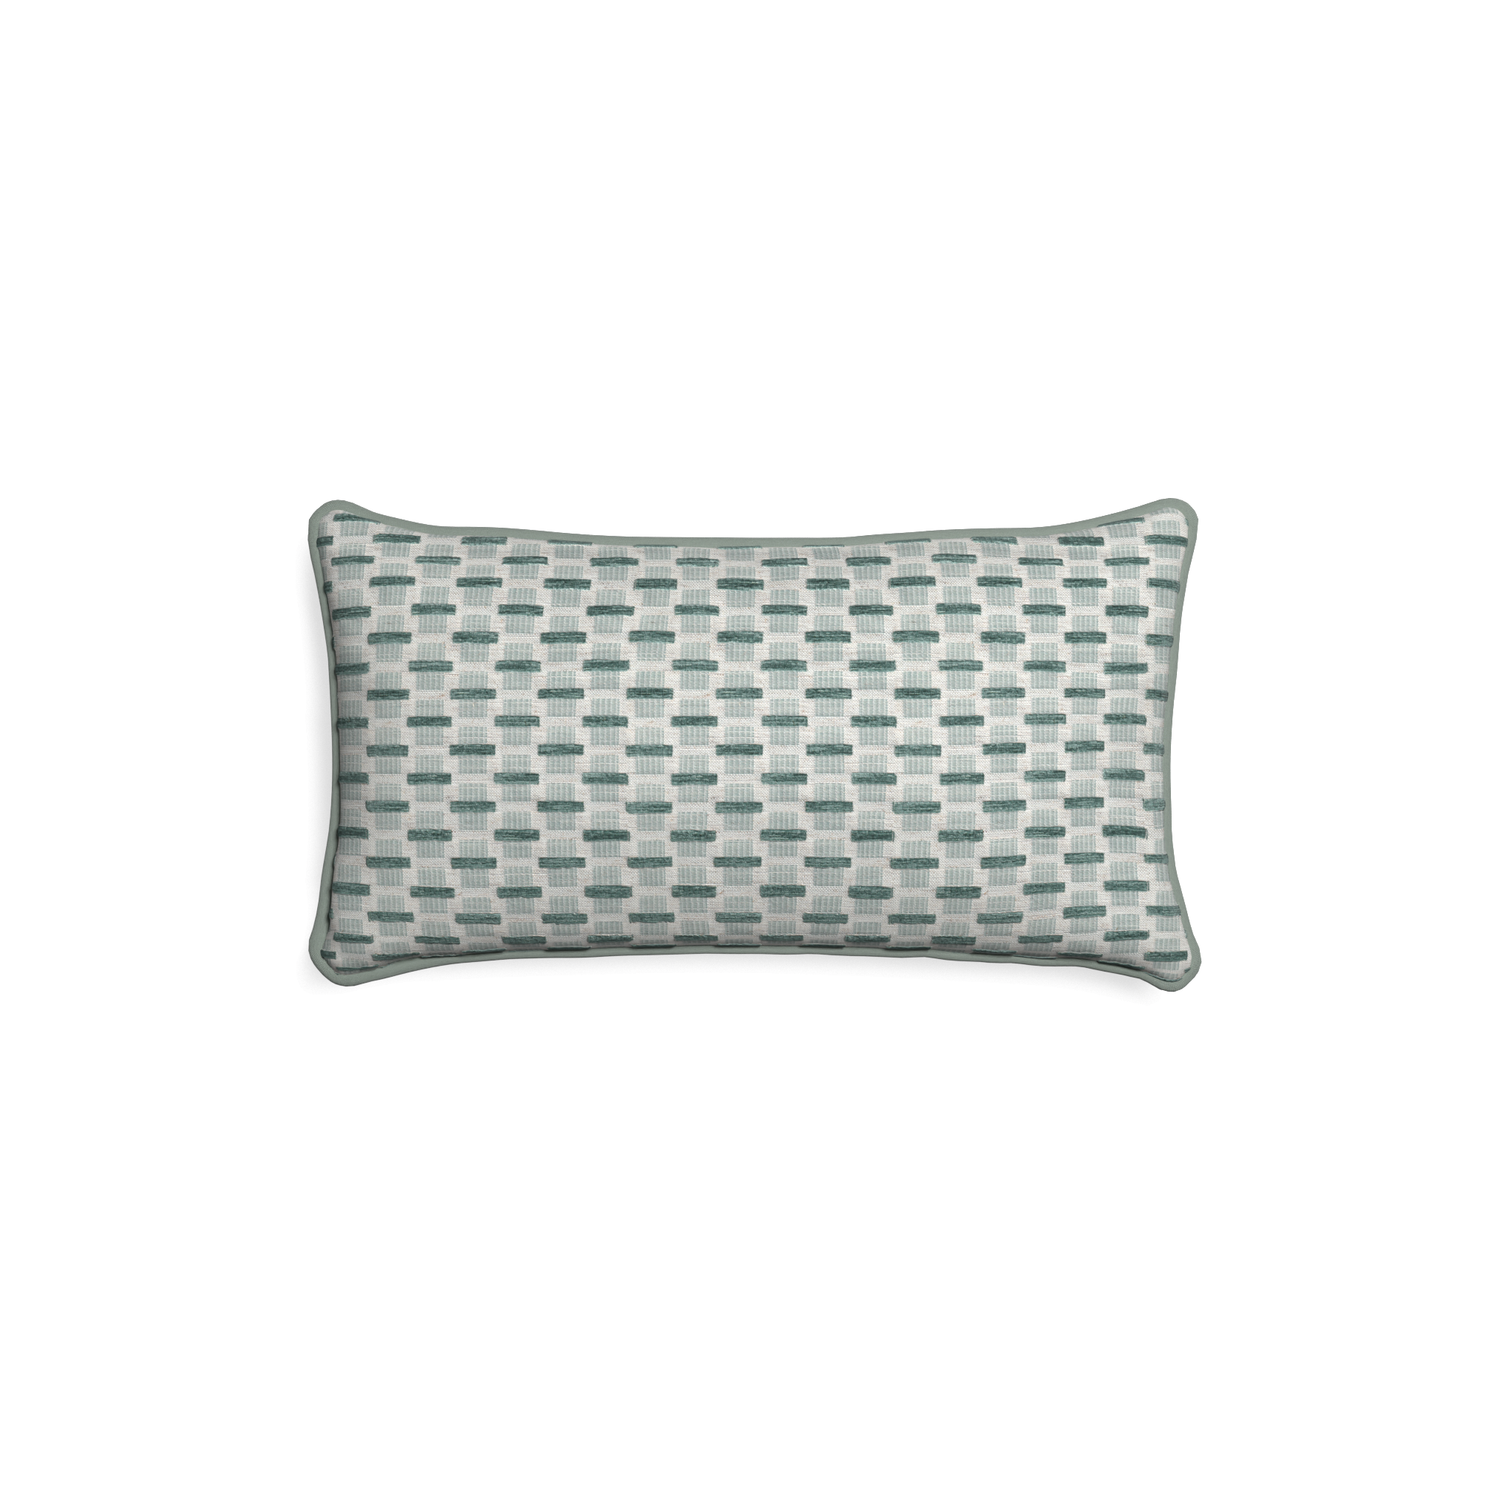 Petite-lumbar willow mint custom green geometric chenillepillow with sage piping on white background